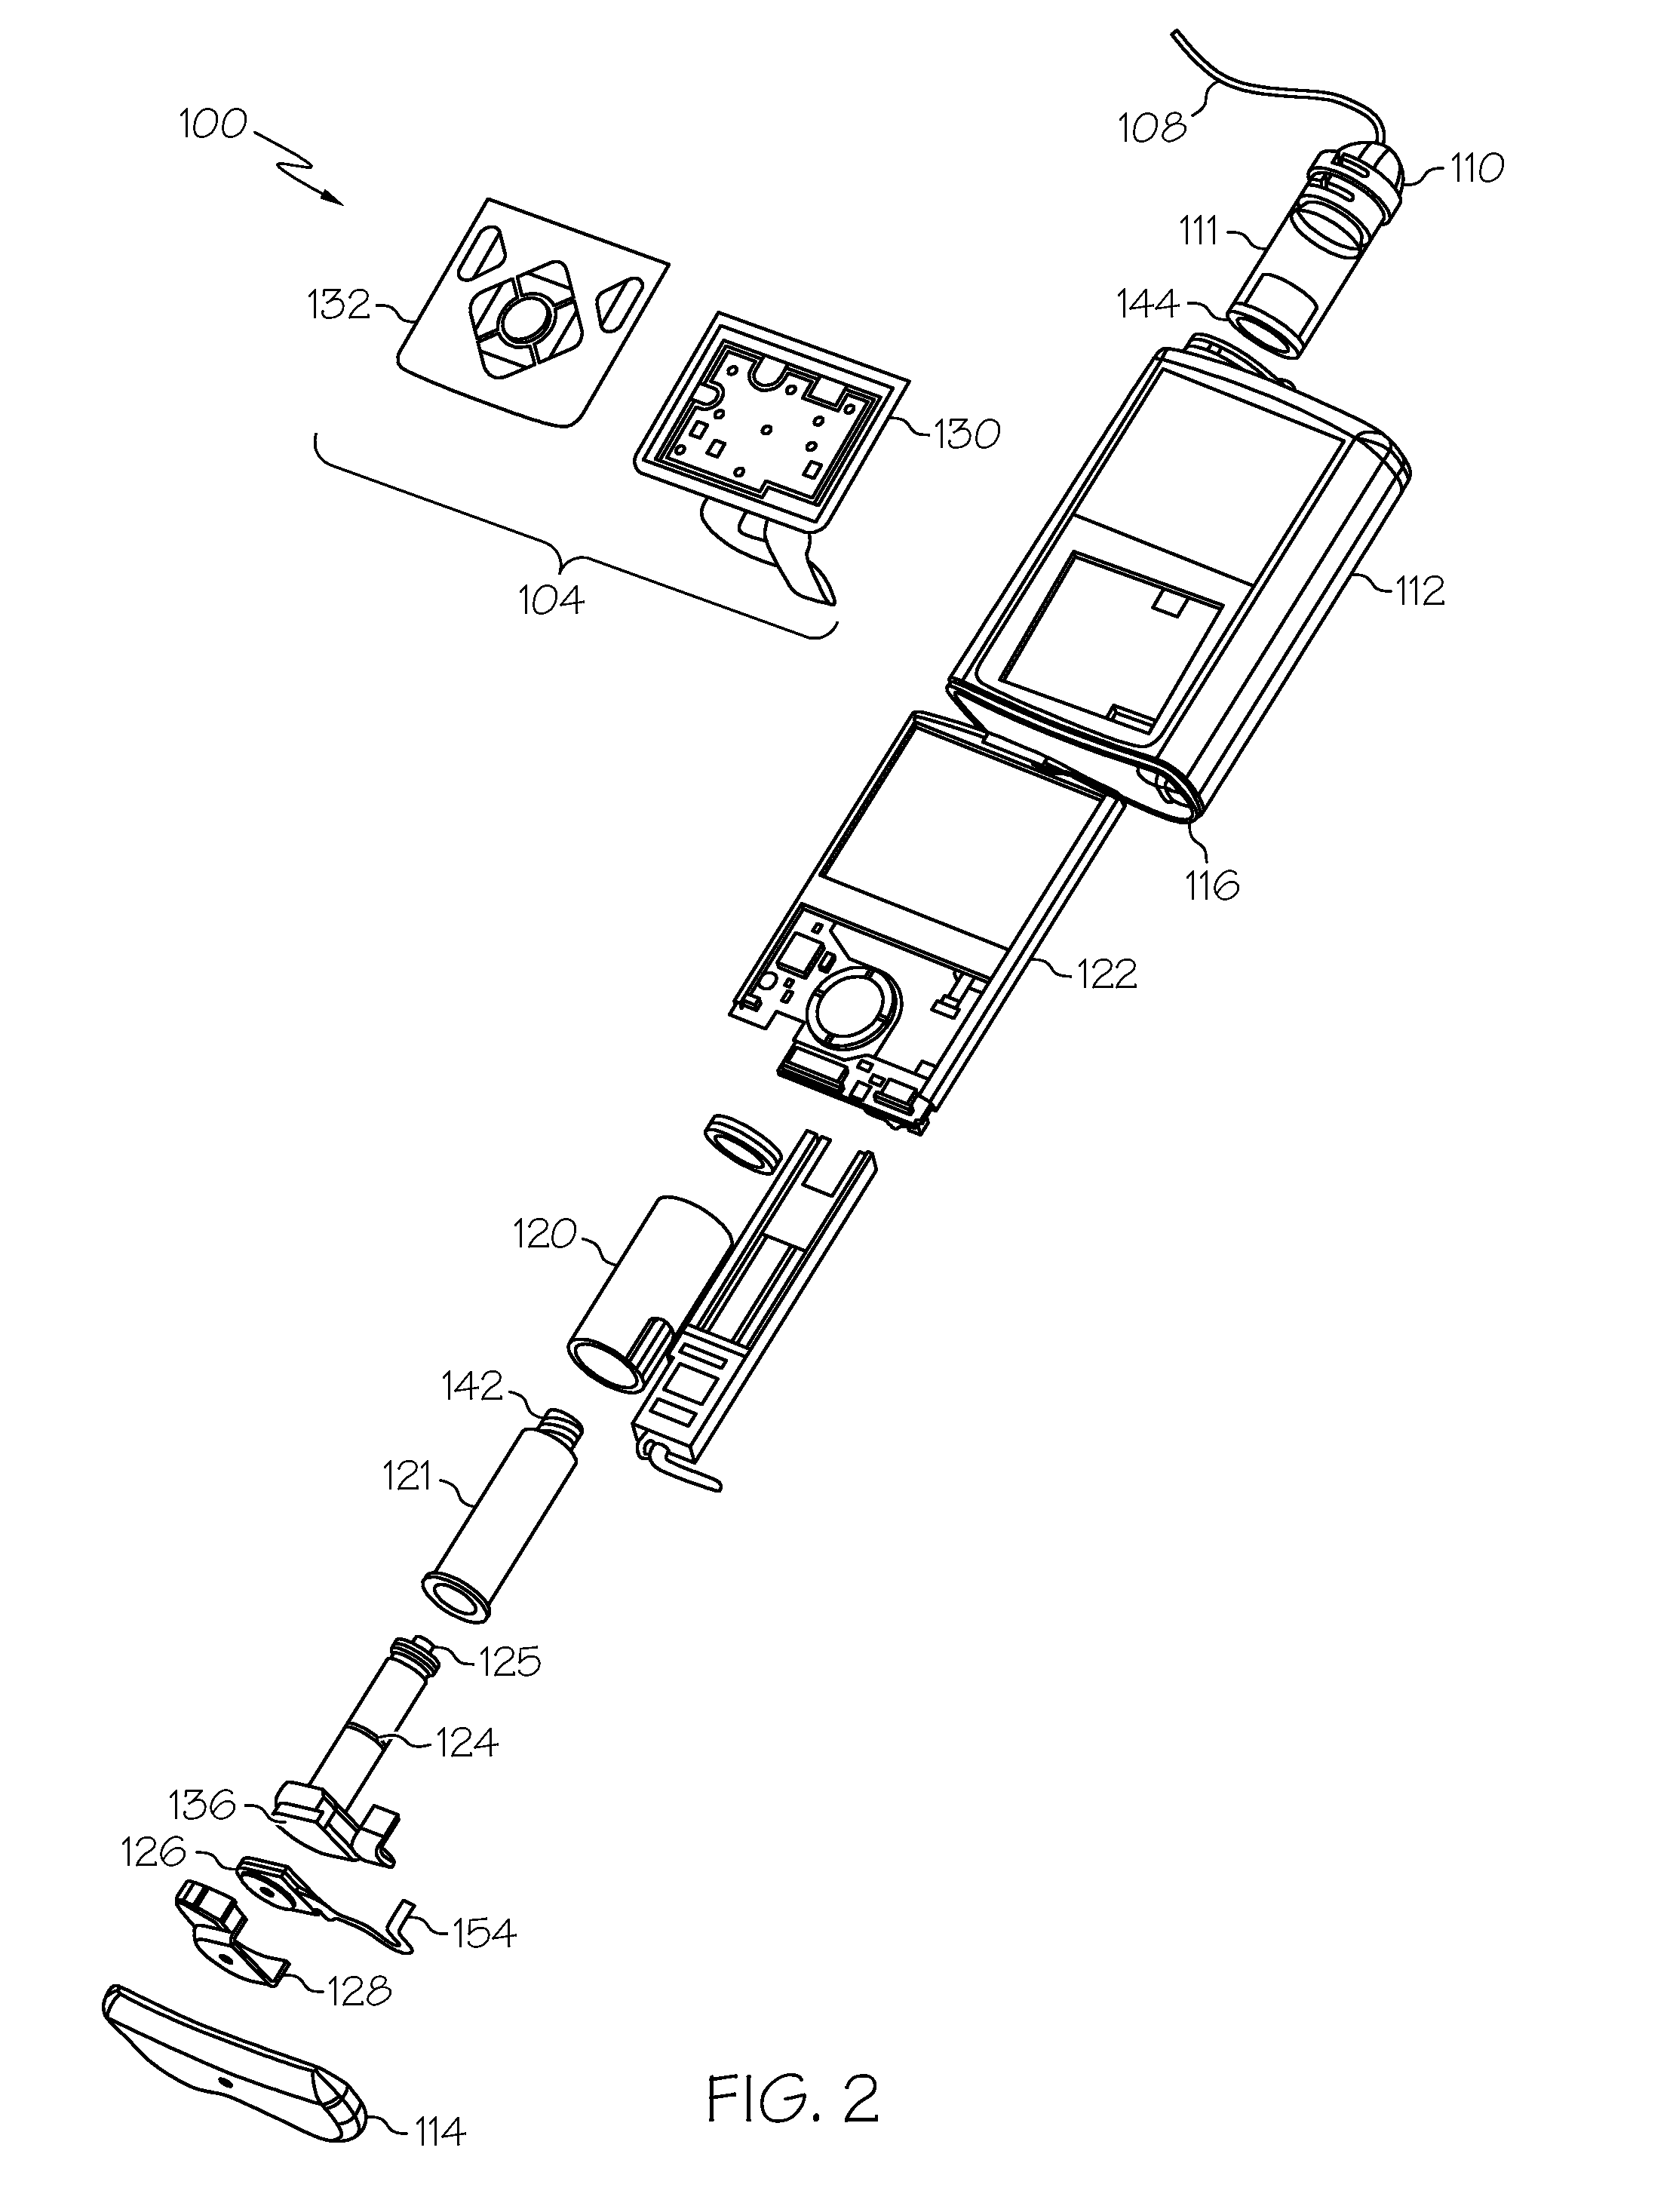 Fluid reservoir seating procedure for a fluid infusion device